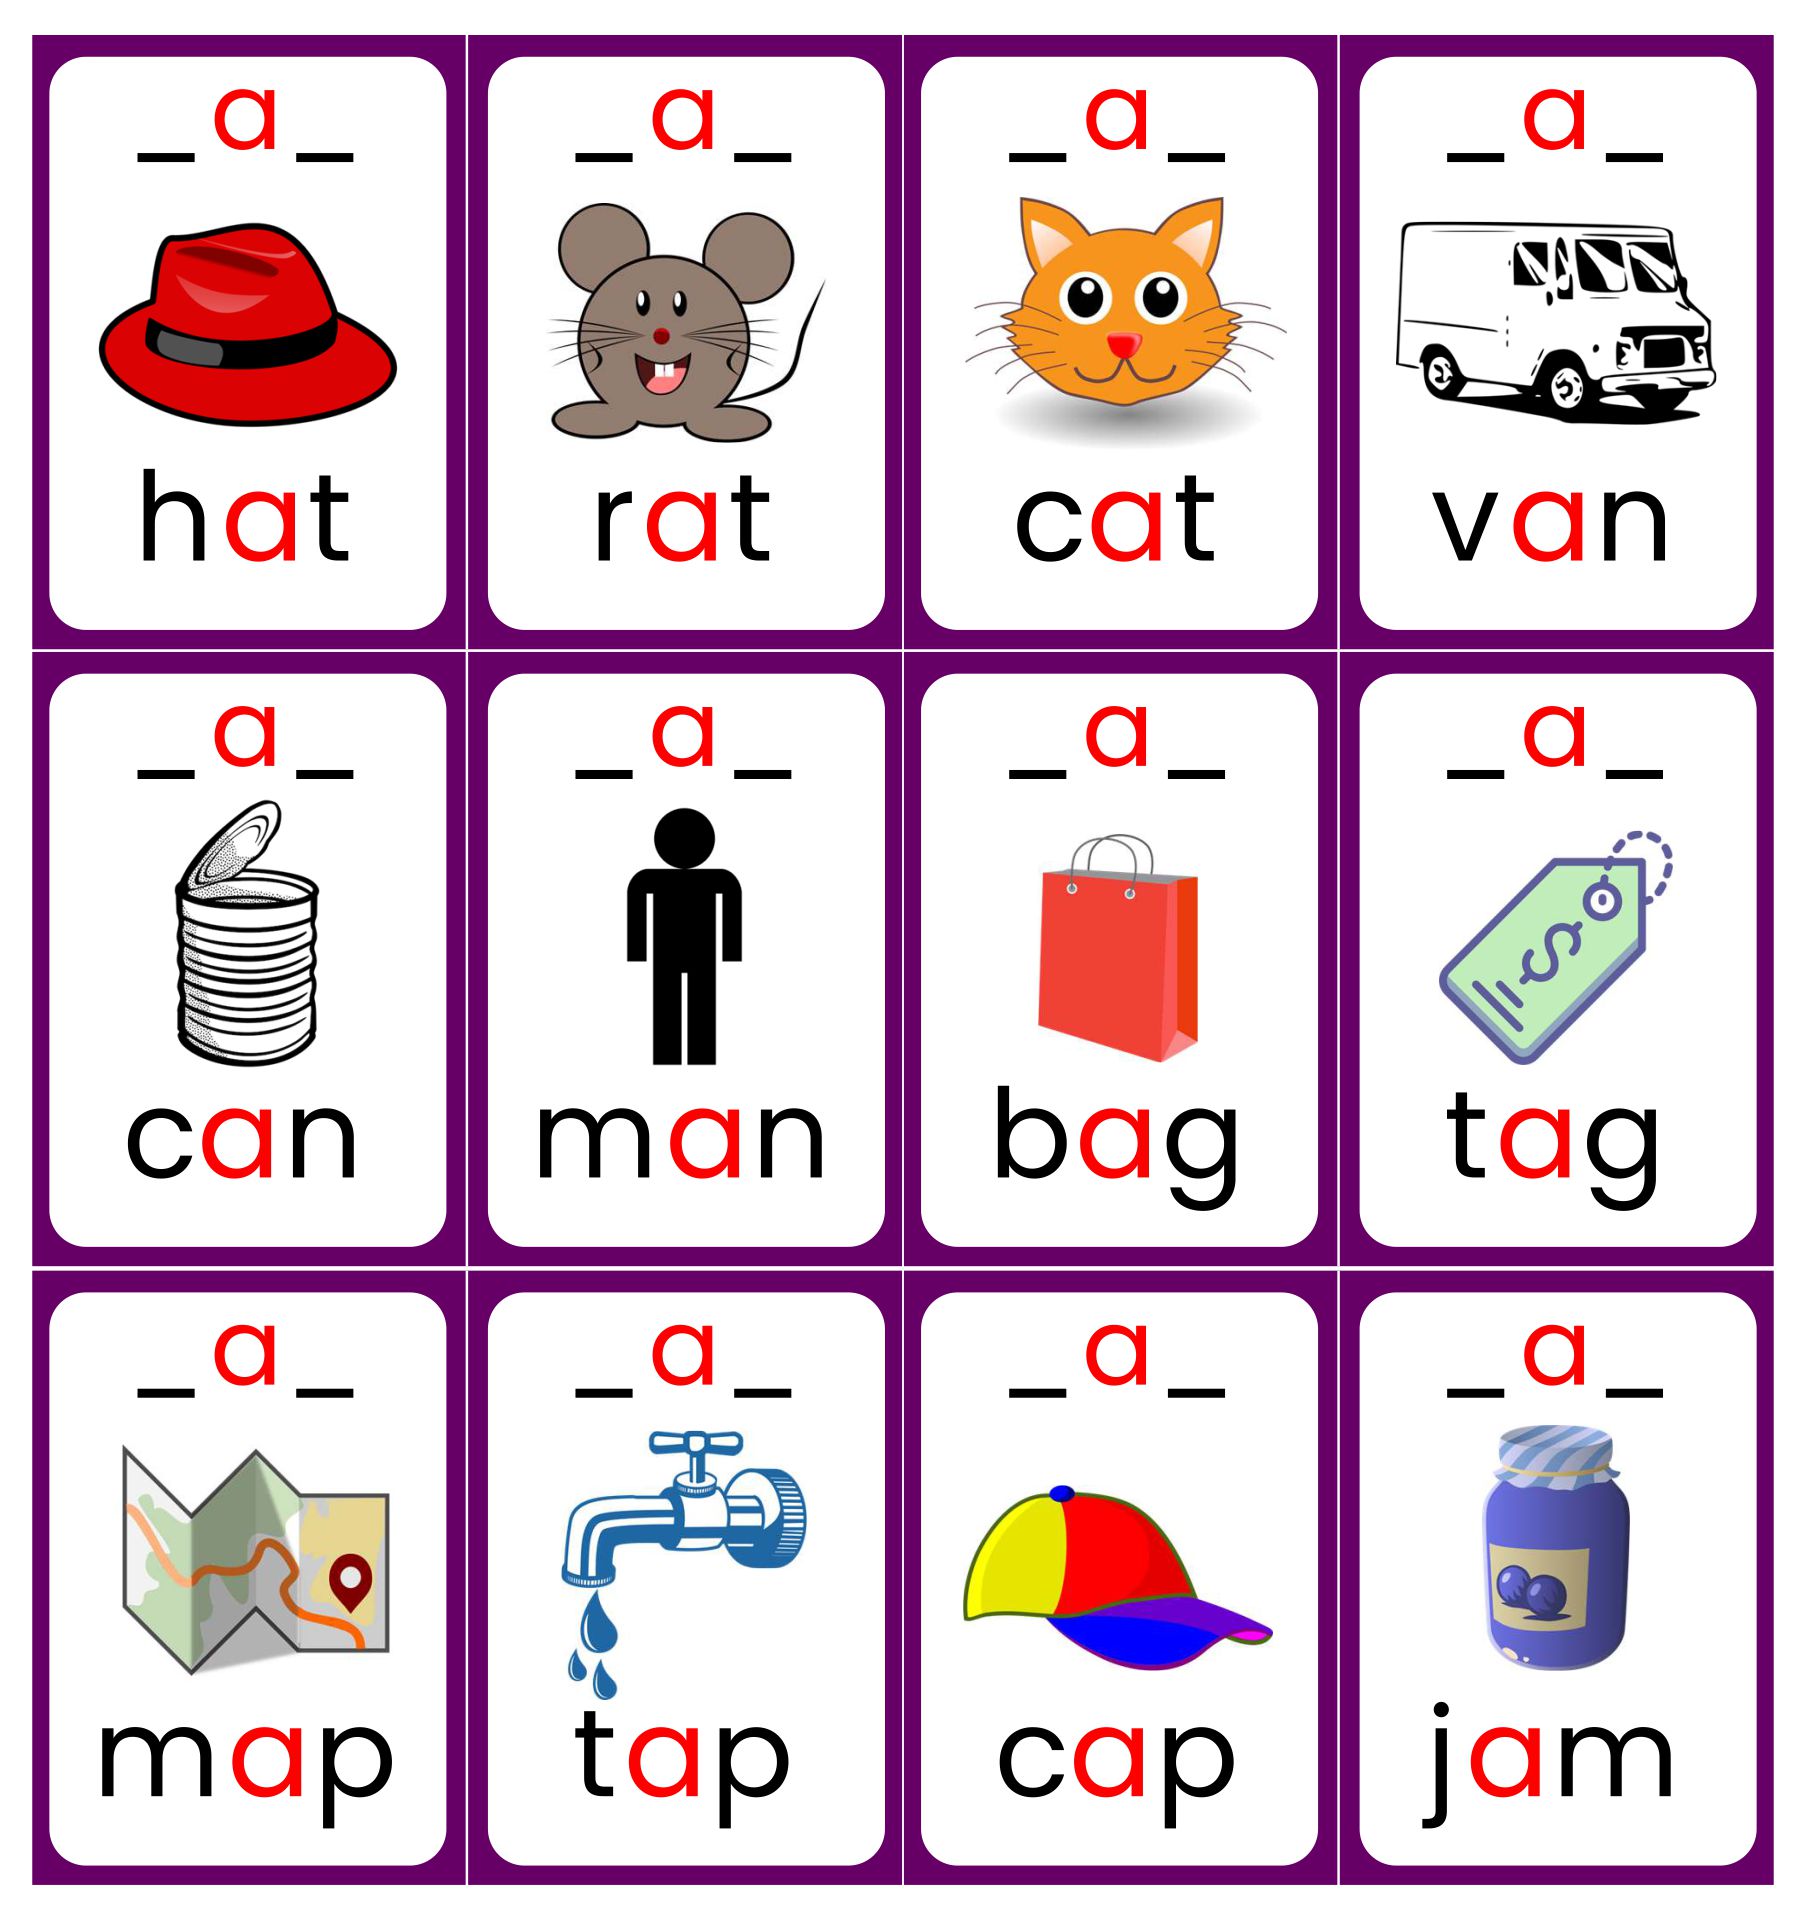 Alphabet Flash Cards Printable 05 06 2013 There Are Some Ways To Use Alphabet Flash Cards To 